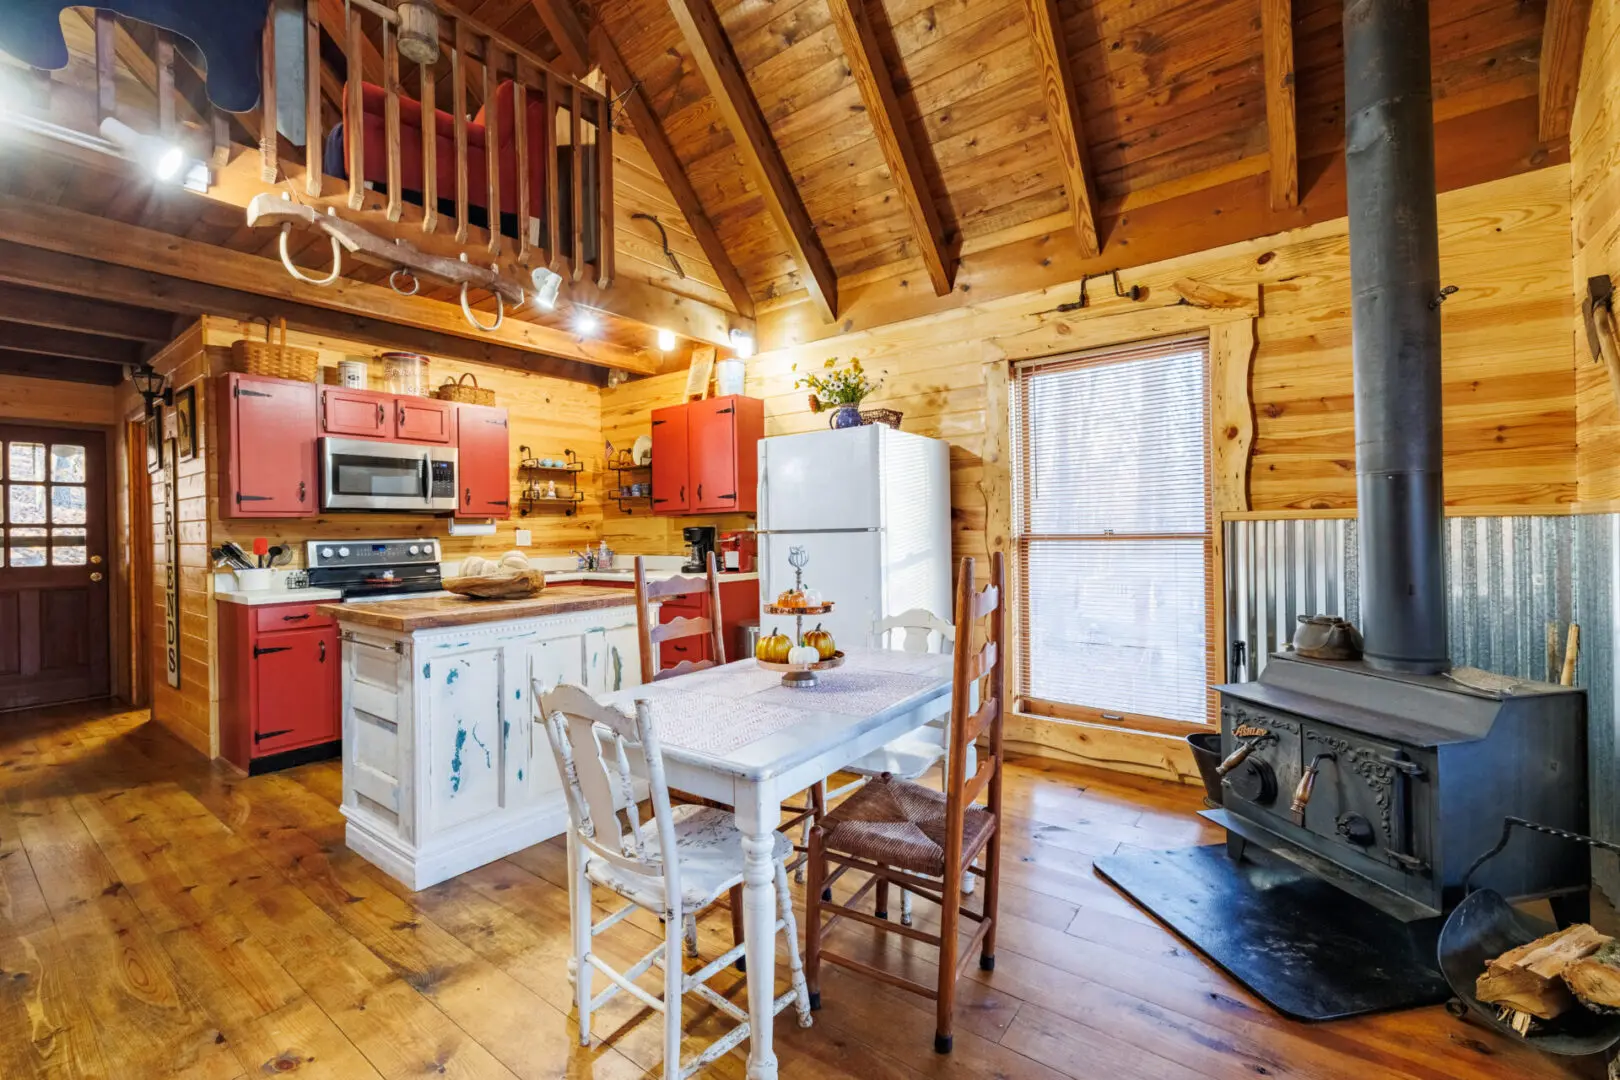 A rustic log cabin kitchen with a cozy wood stove, perfect for a relaxing vacation.